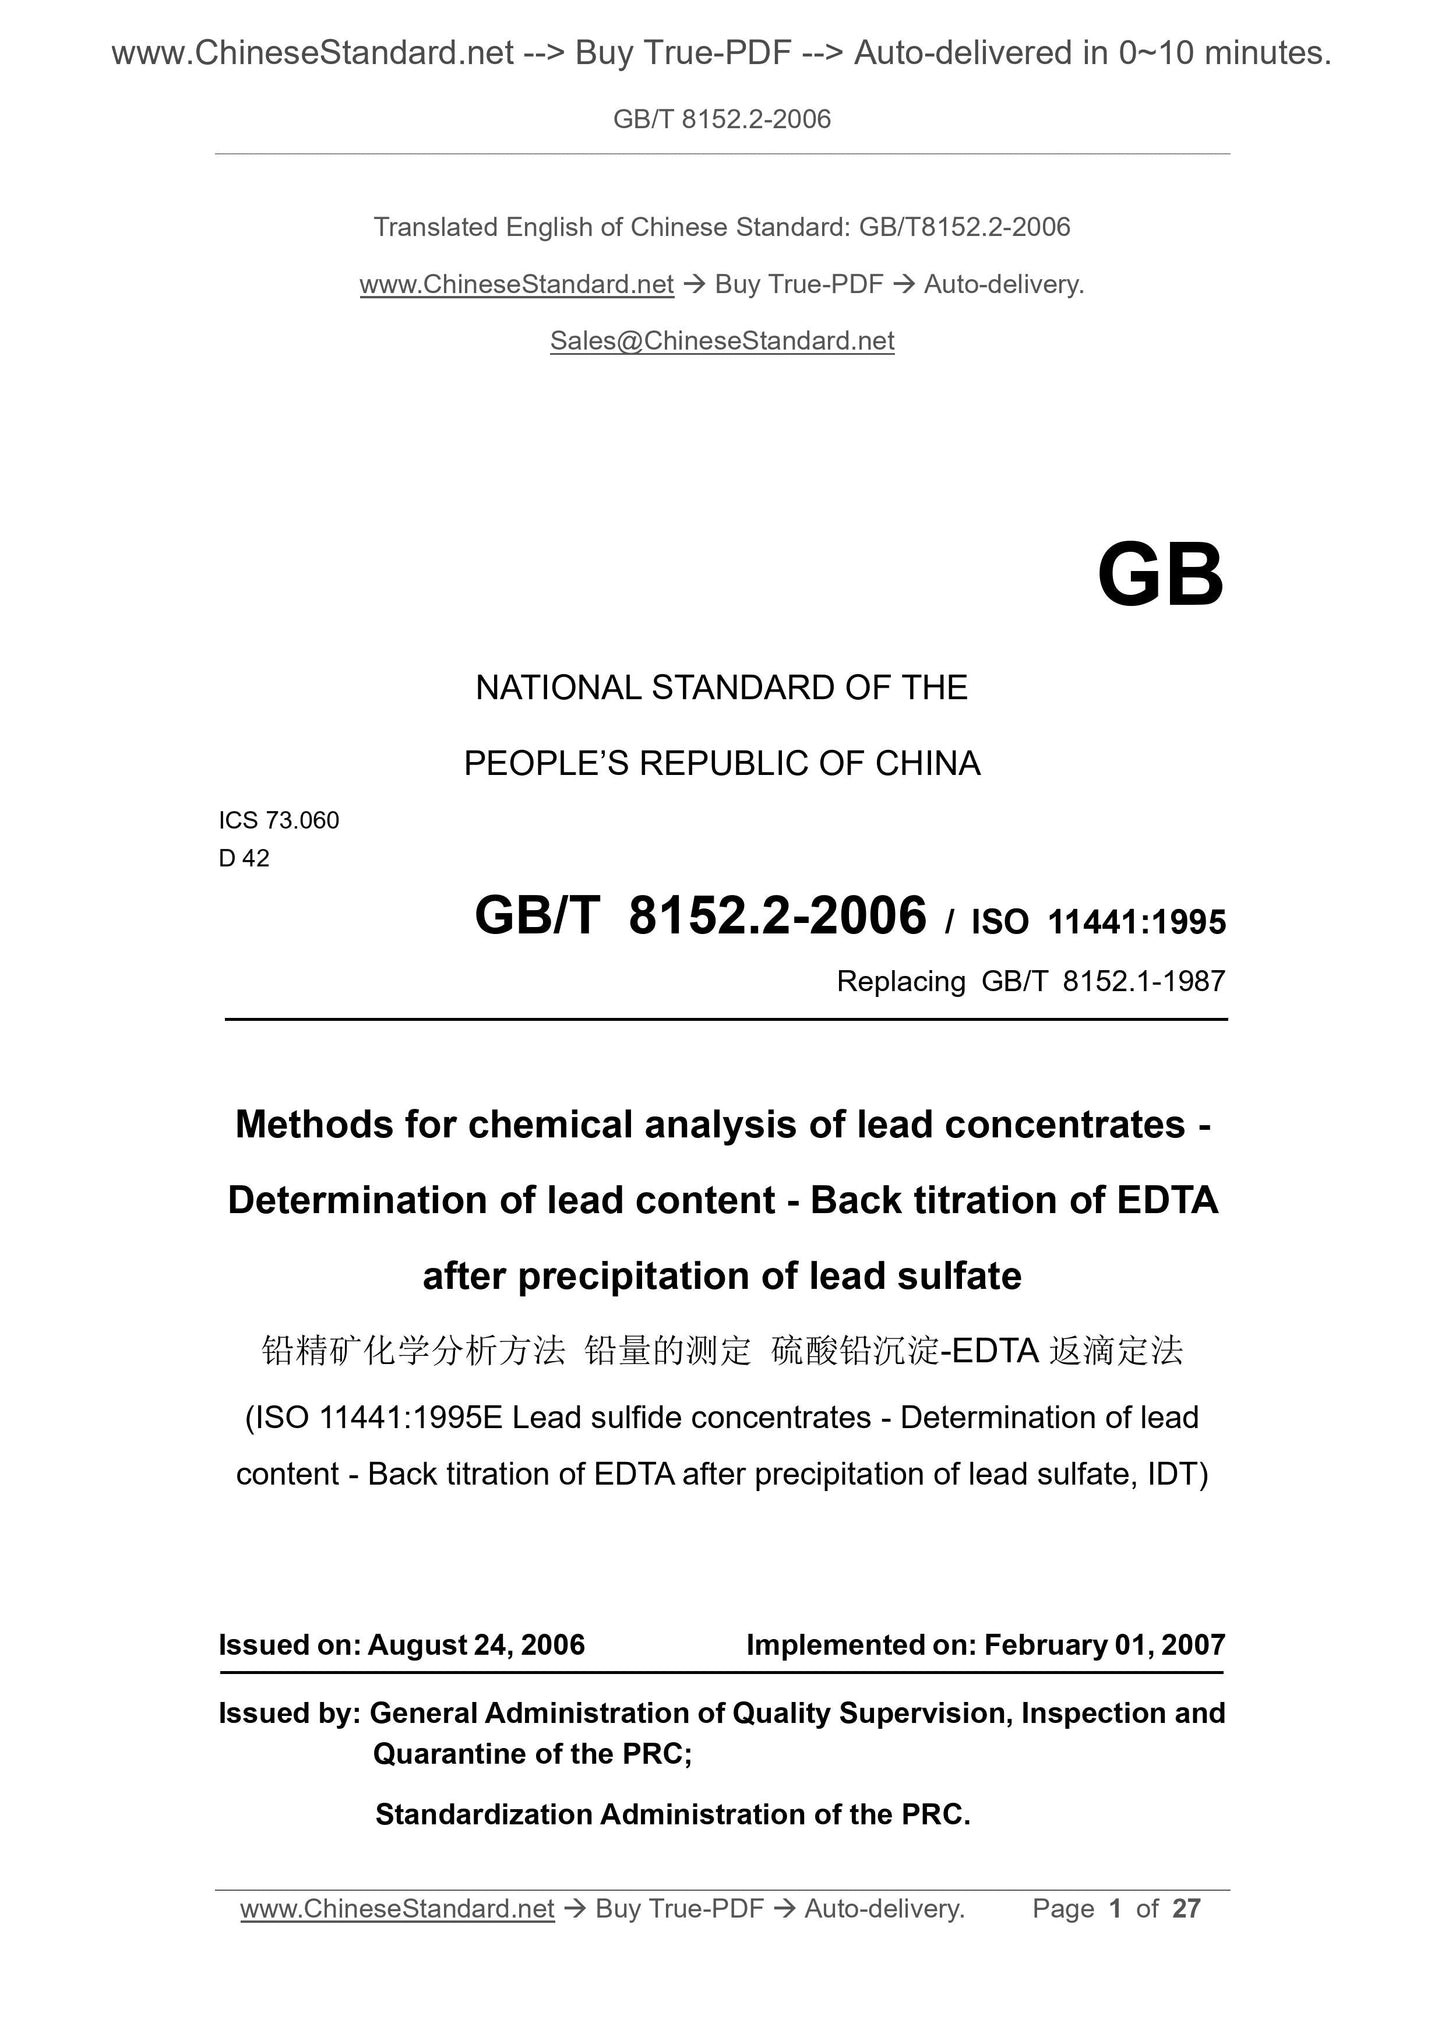 GB/T 8152.2-2006 Page 1